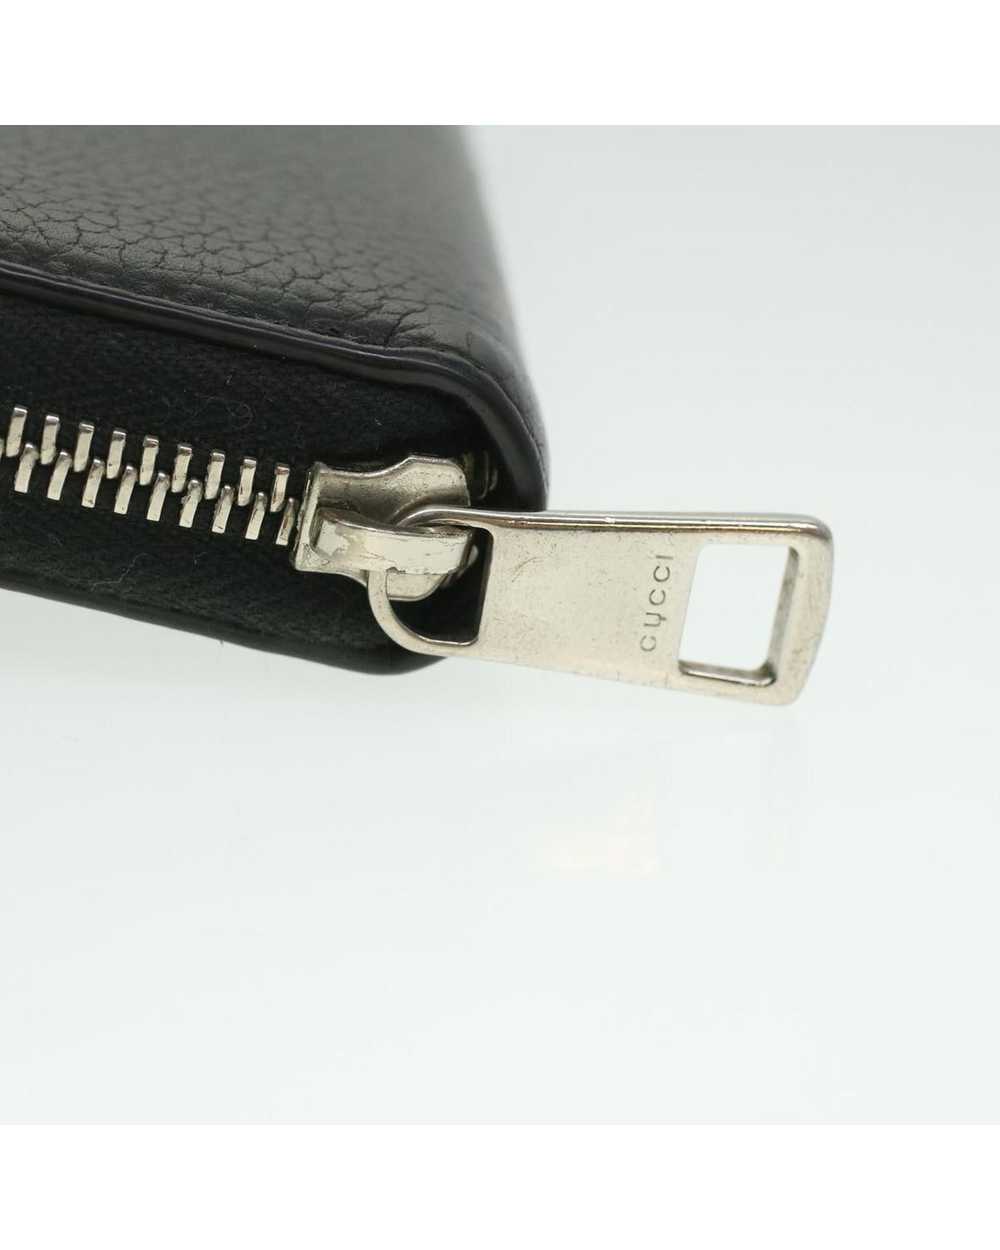 Gucci Black Leather Long Wallet by Gucci 473928 - image 7